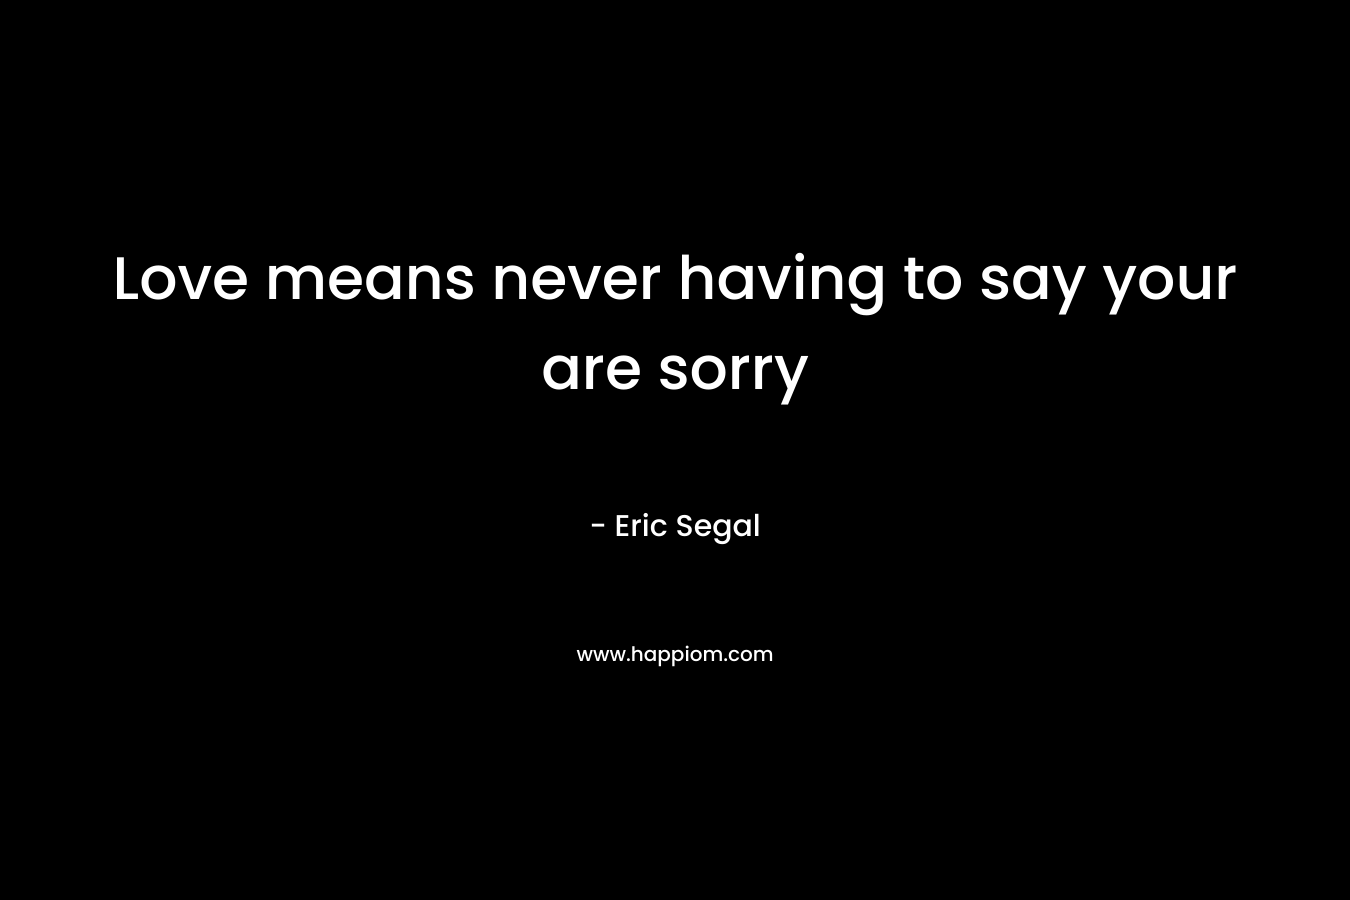 Love means never having to say your are sorry